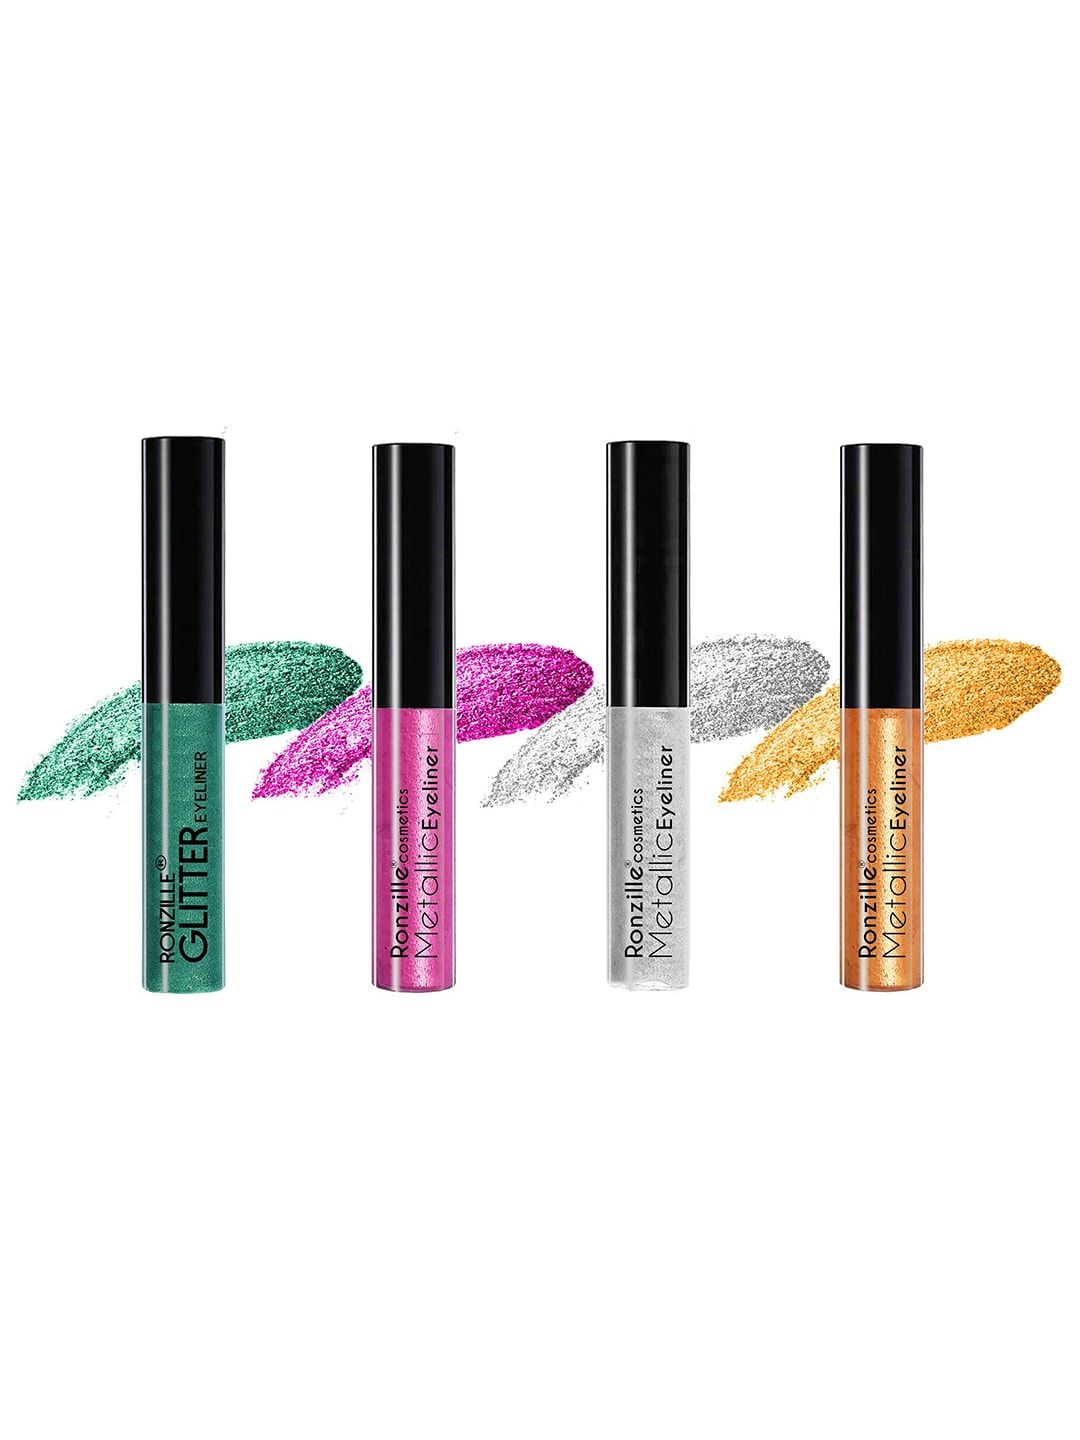 Ronzille Pack of 4 Glitter Eyeliners Price in India